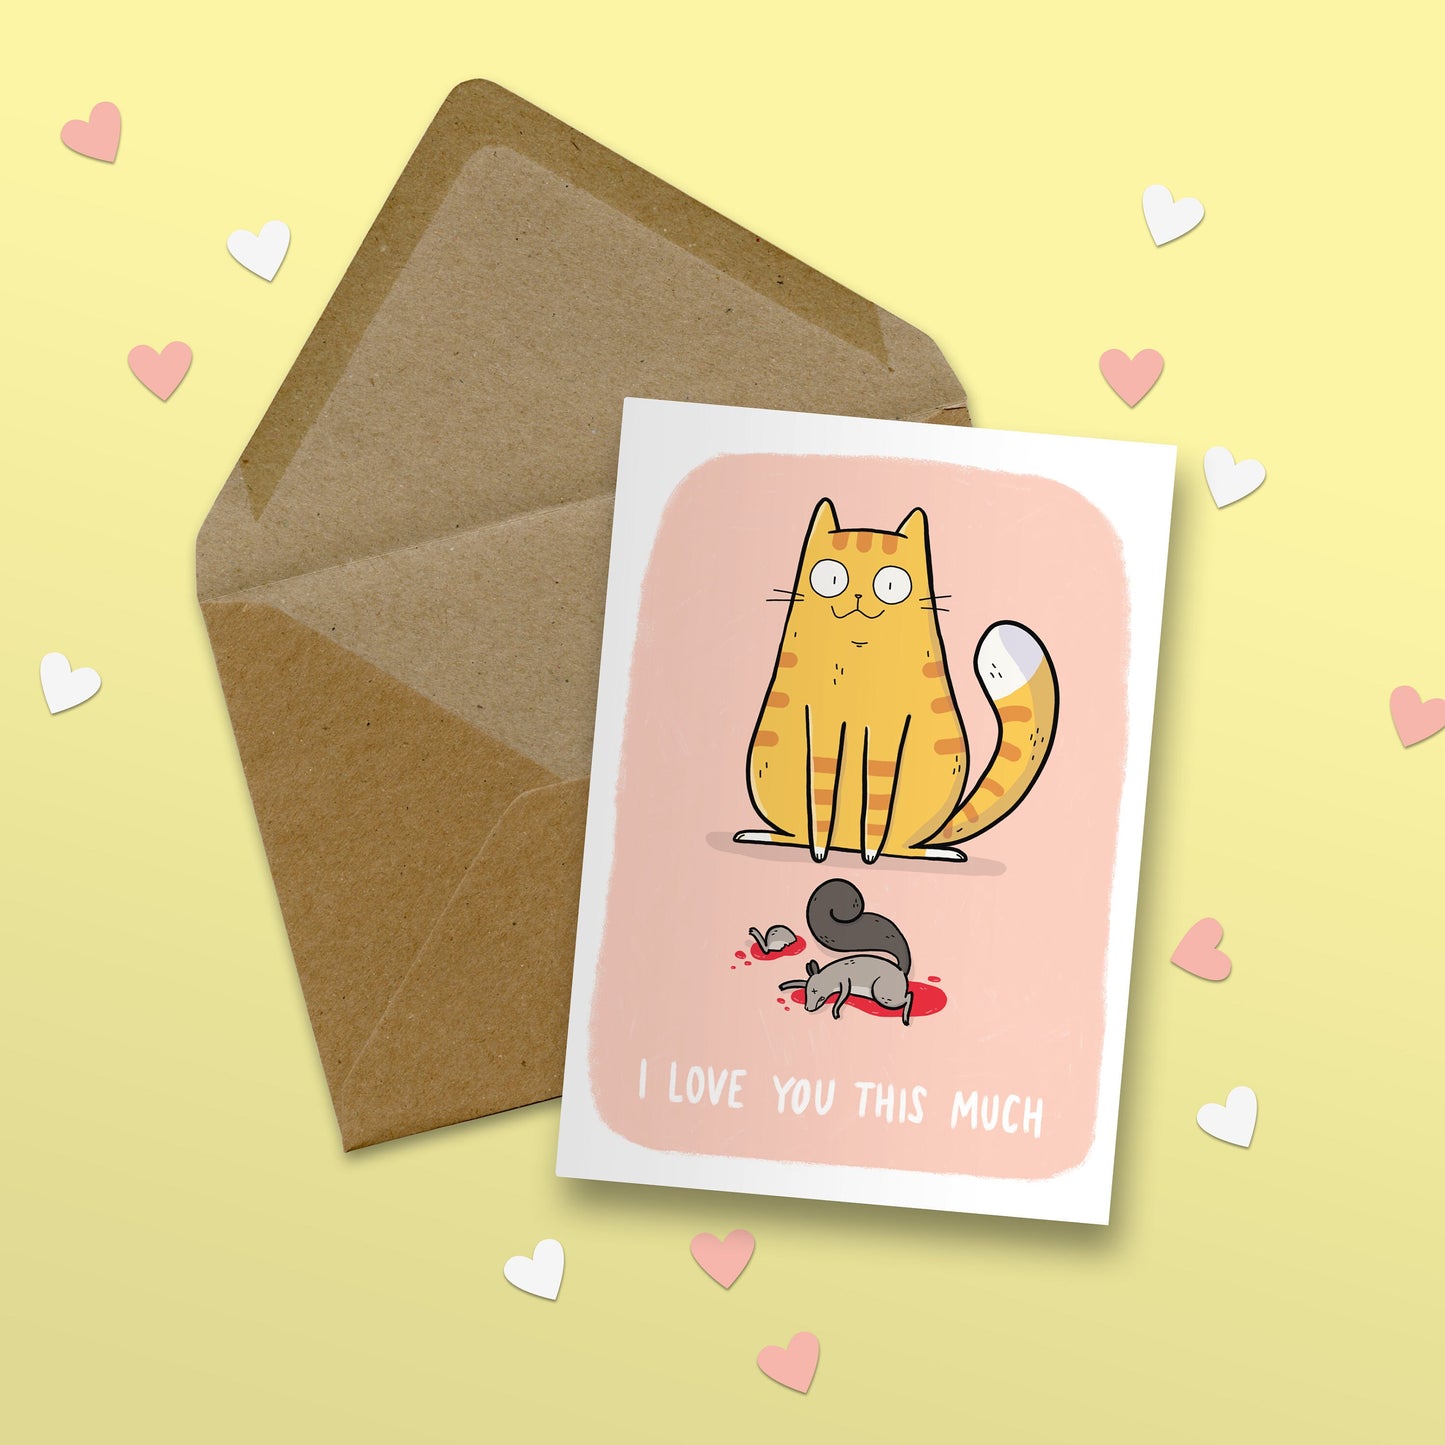 I Love You This Much Card, Cat And Dead Squirrel Greeting Card, Cat Greeting Card, Love Card, Valentine's Day